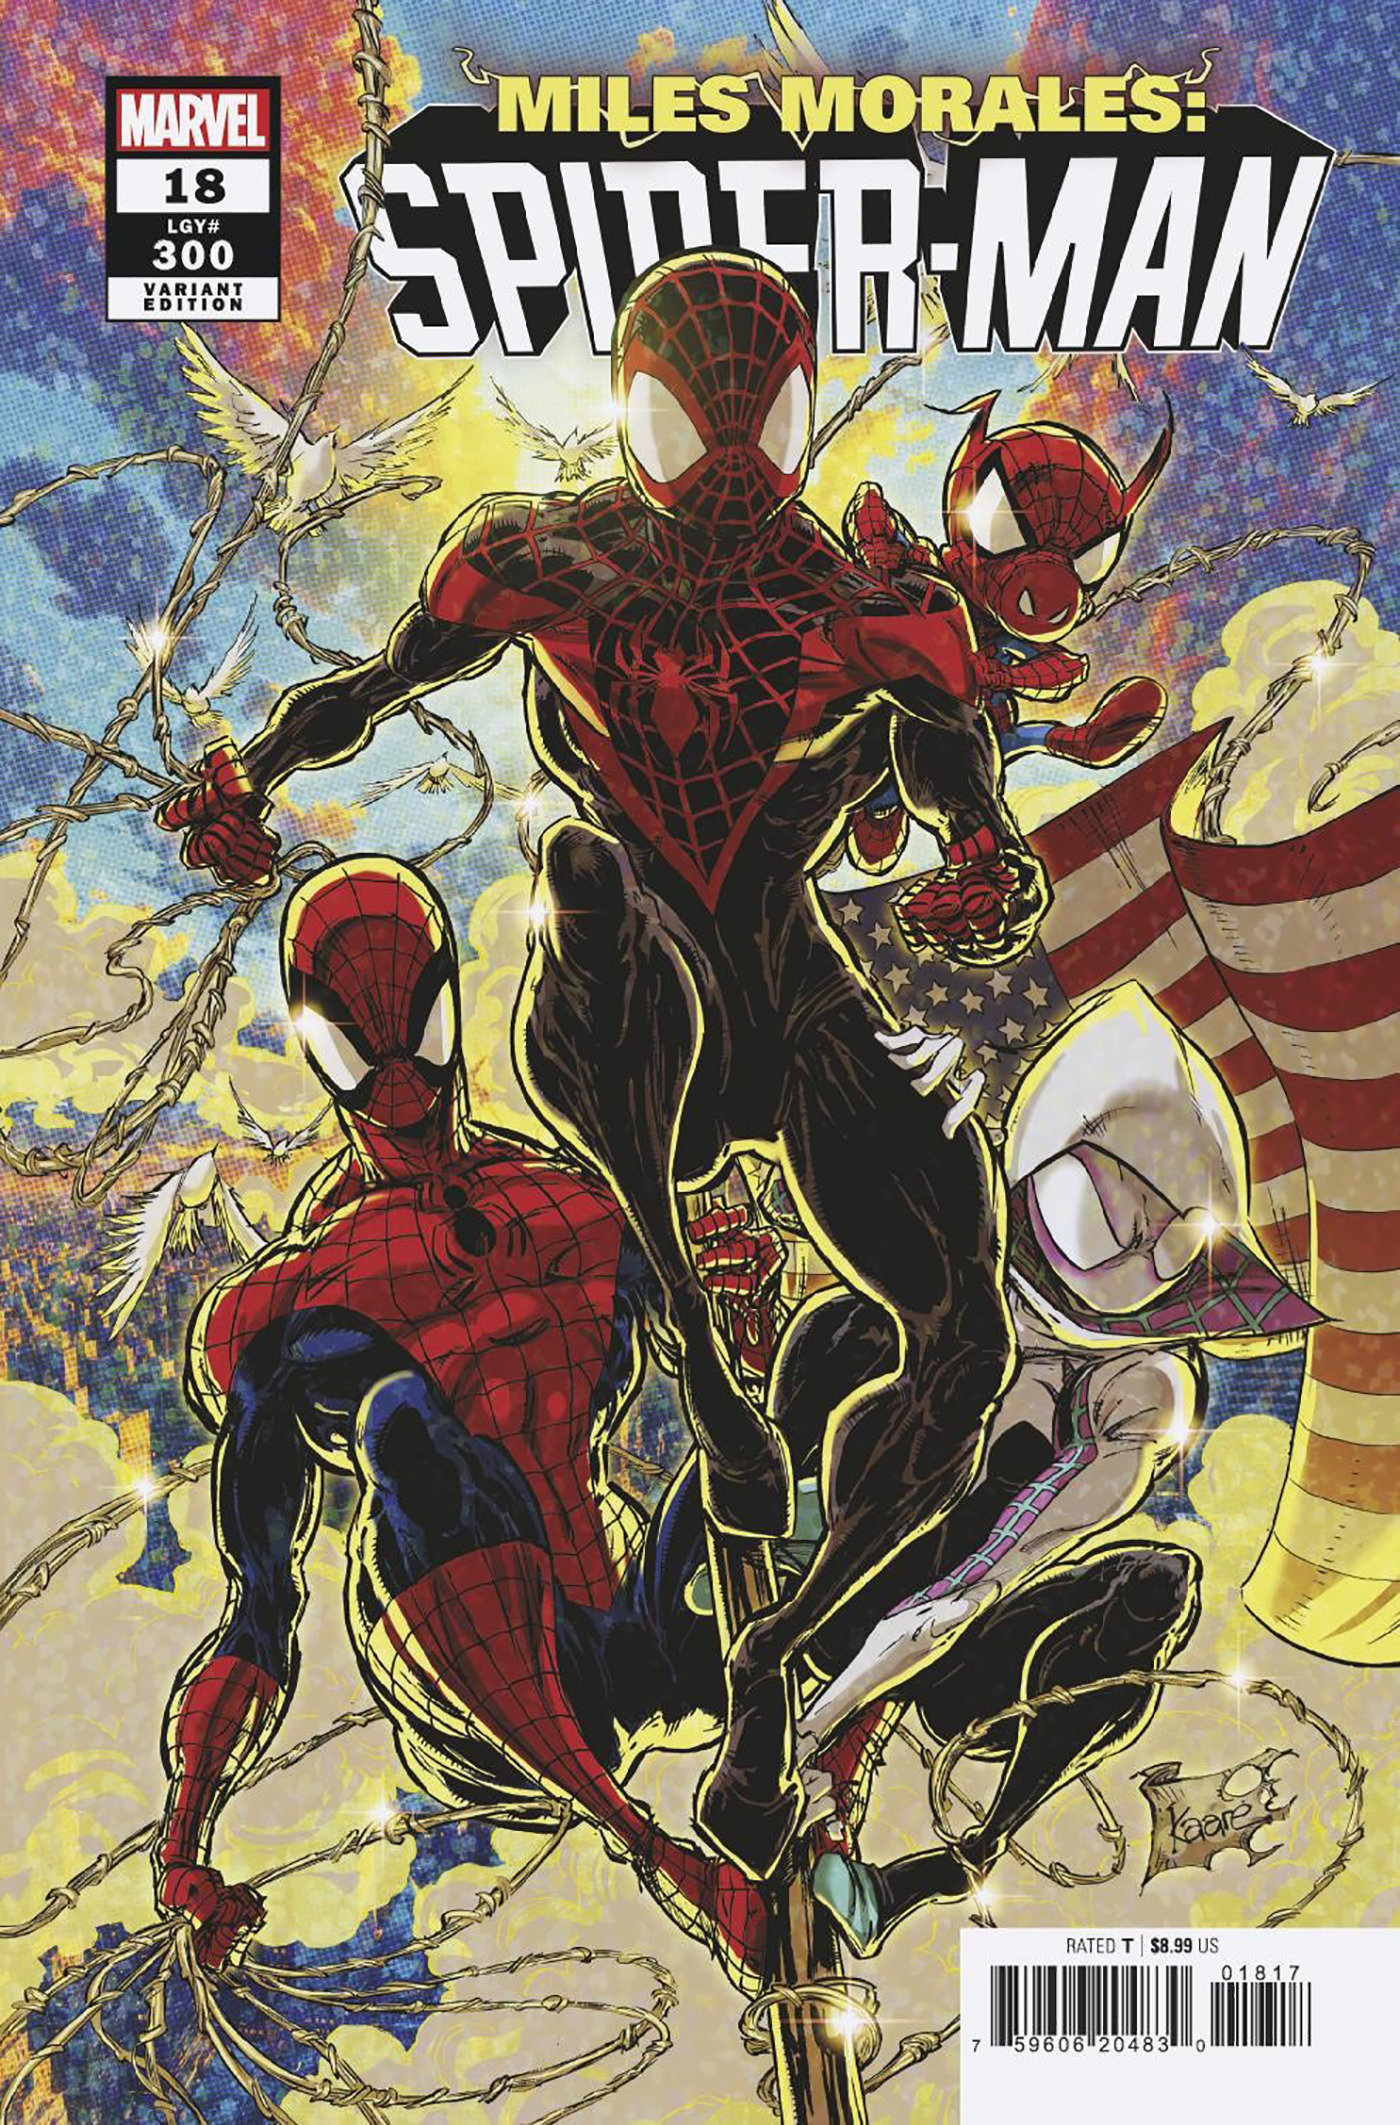 Miles Morales: Spider-Man #18 Kaare Andrews Variant 1 for 25 Incentive